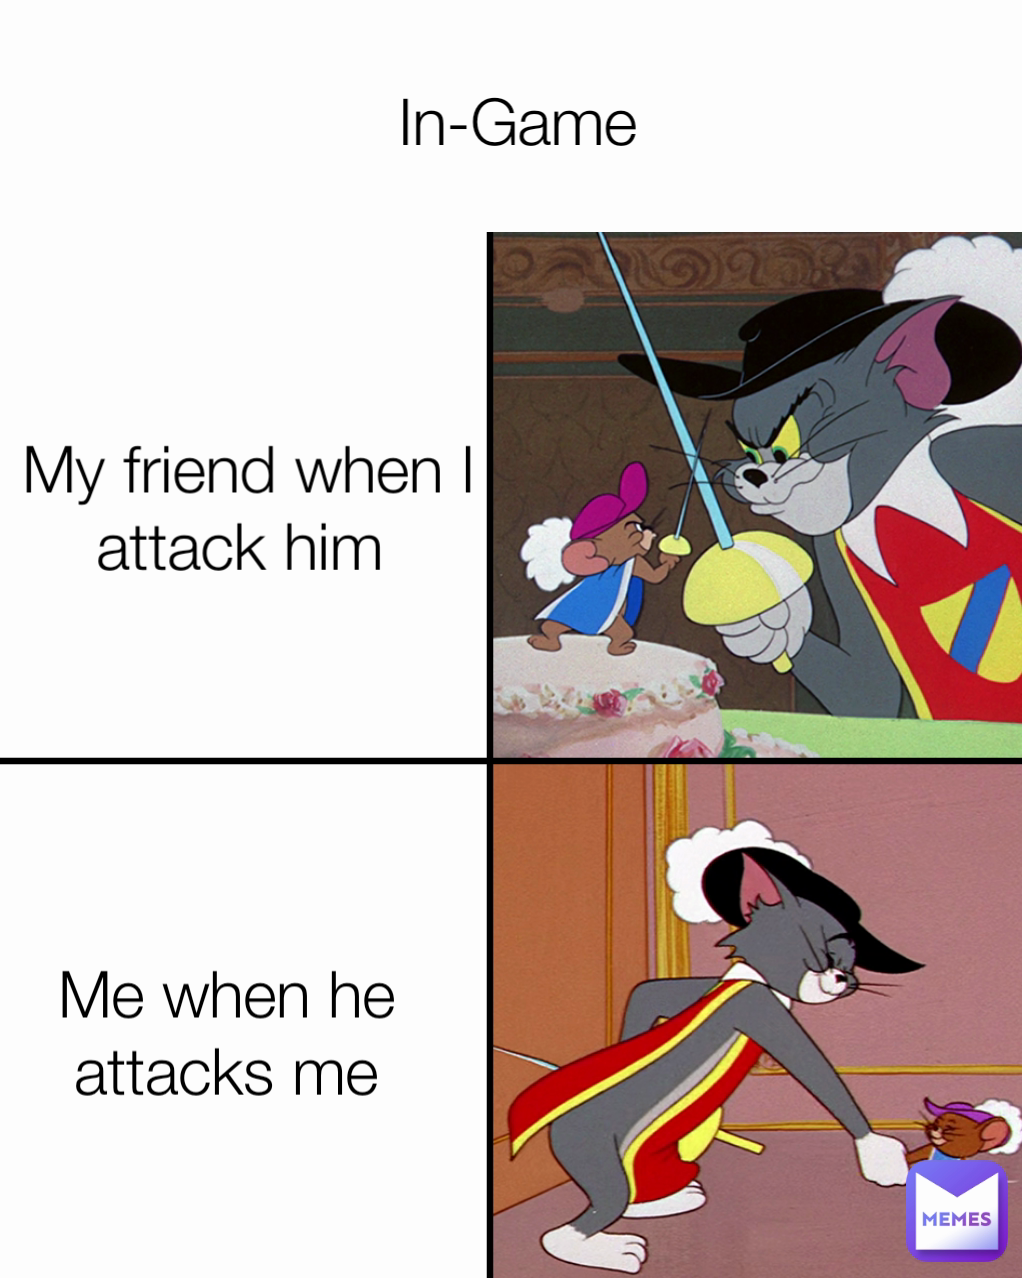 My friend when I attack him  Me when he attacks me In-Game